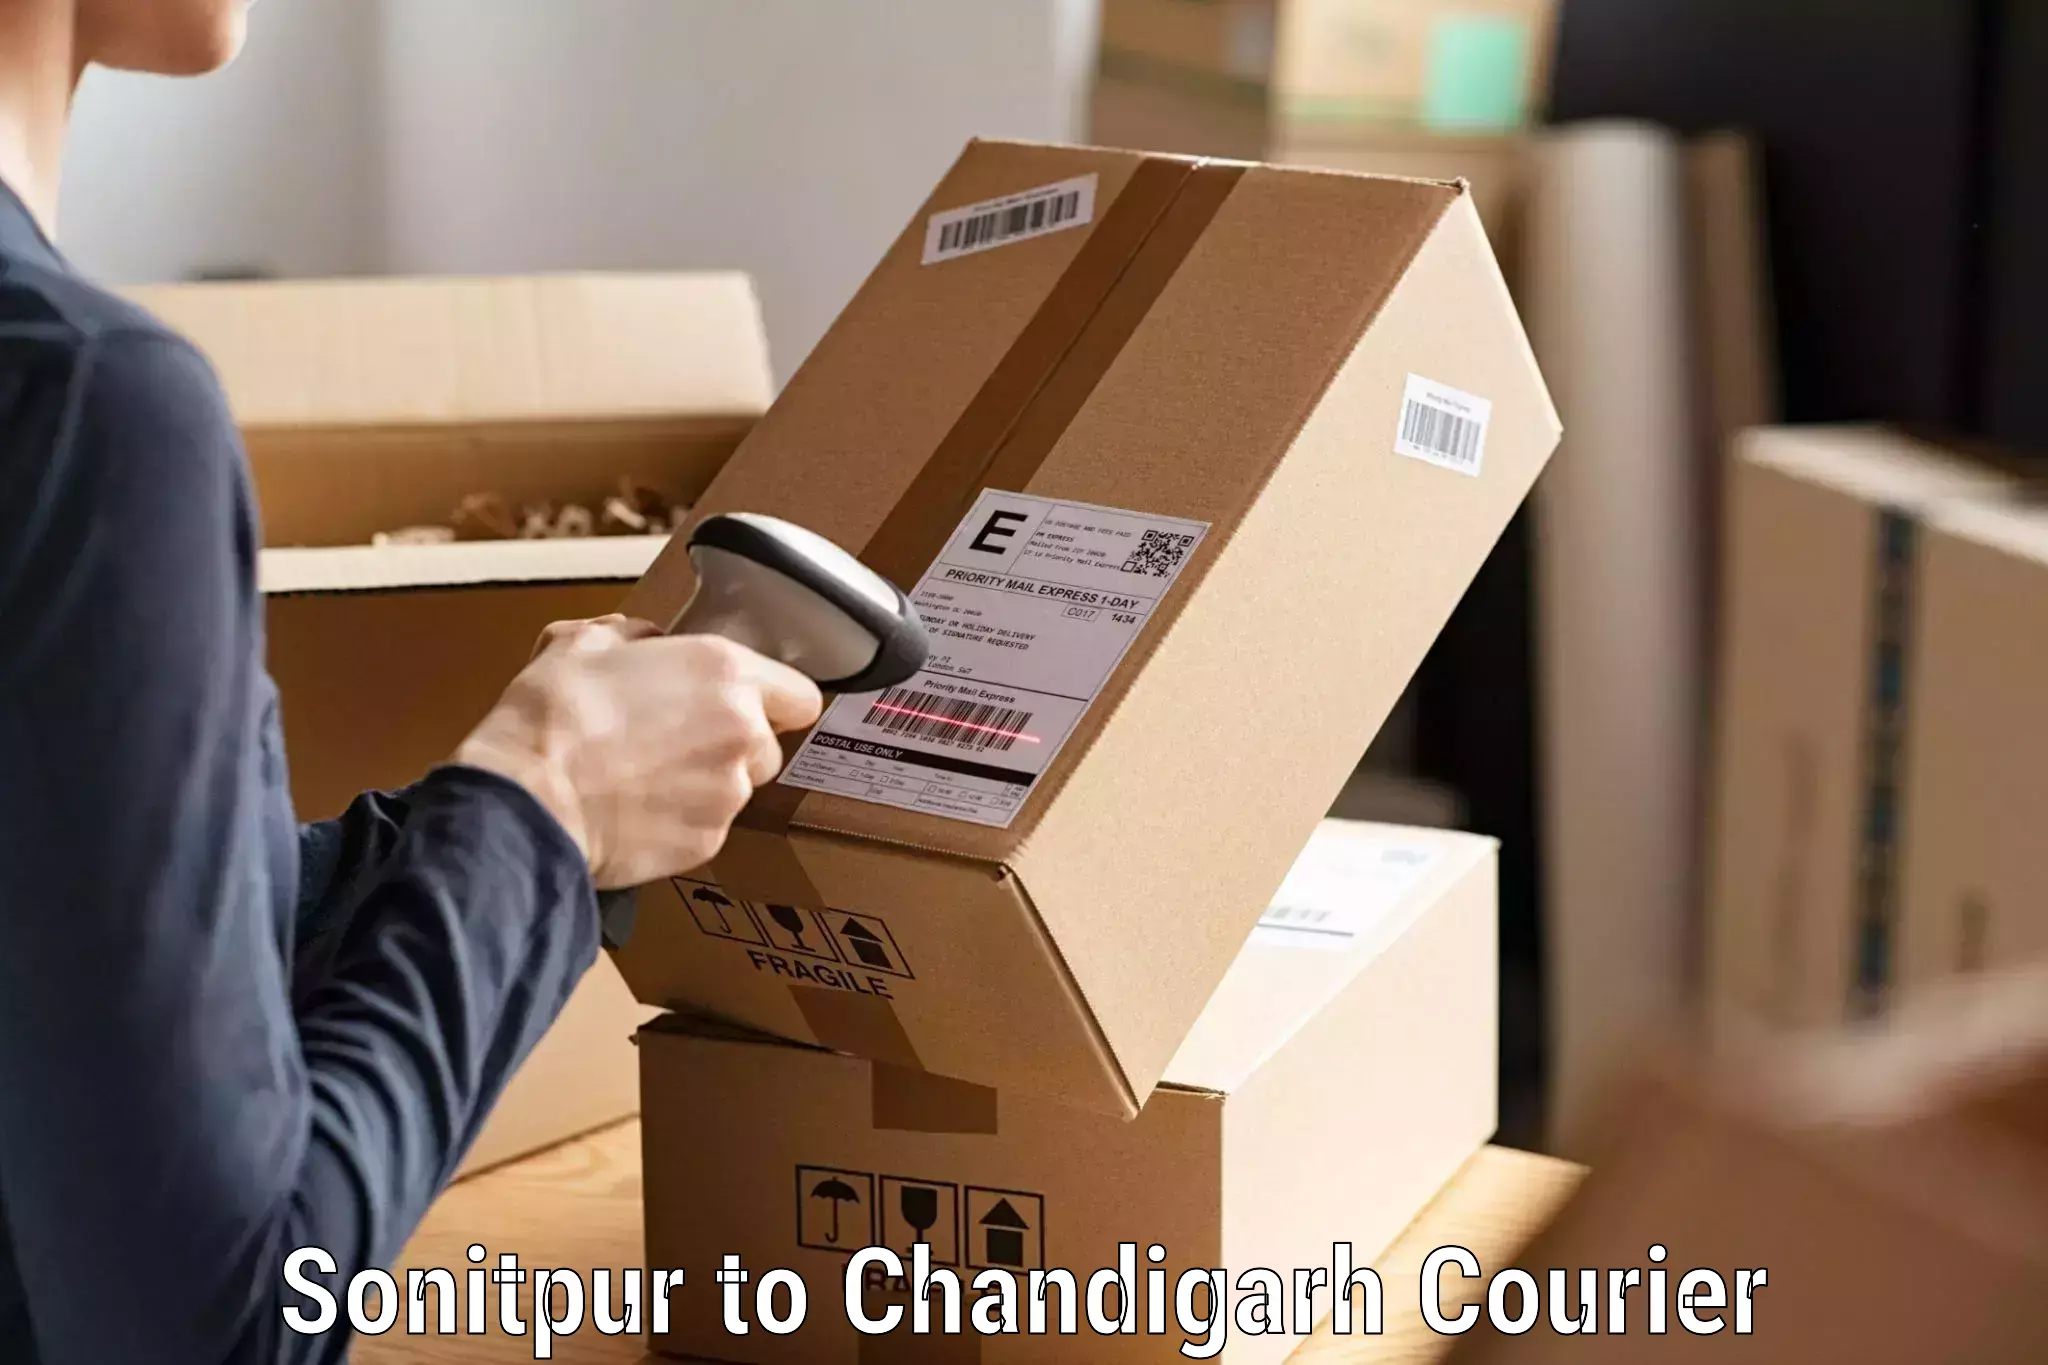 Digital courier platforms Sonitpur to Chandigarh